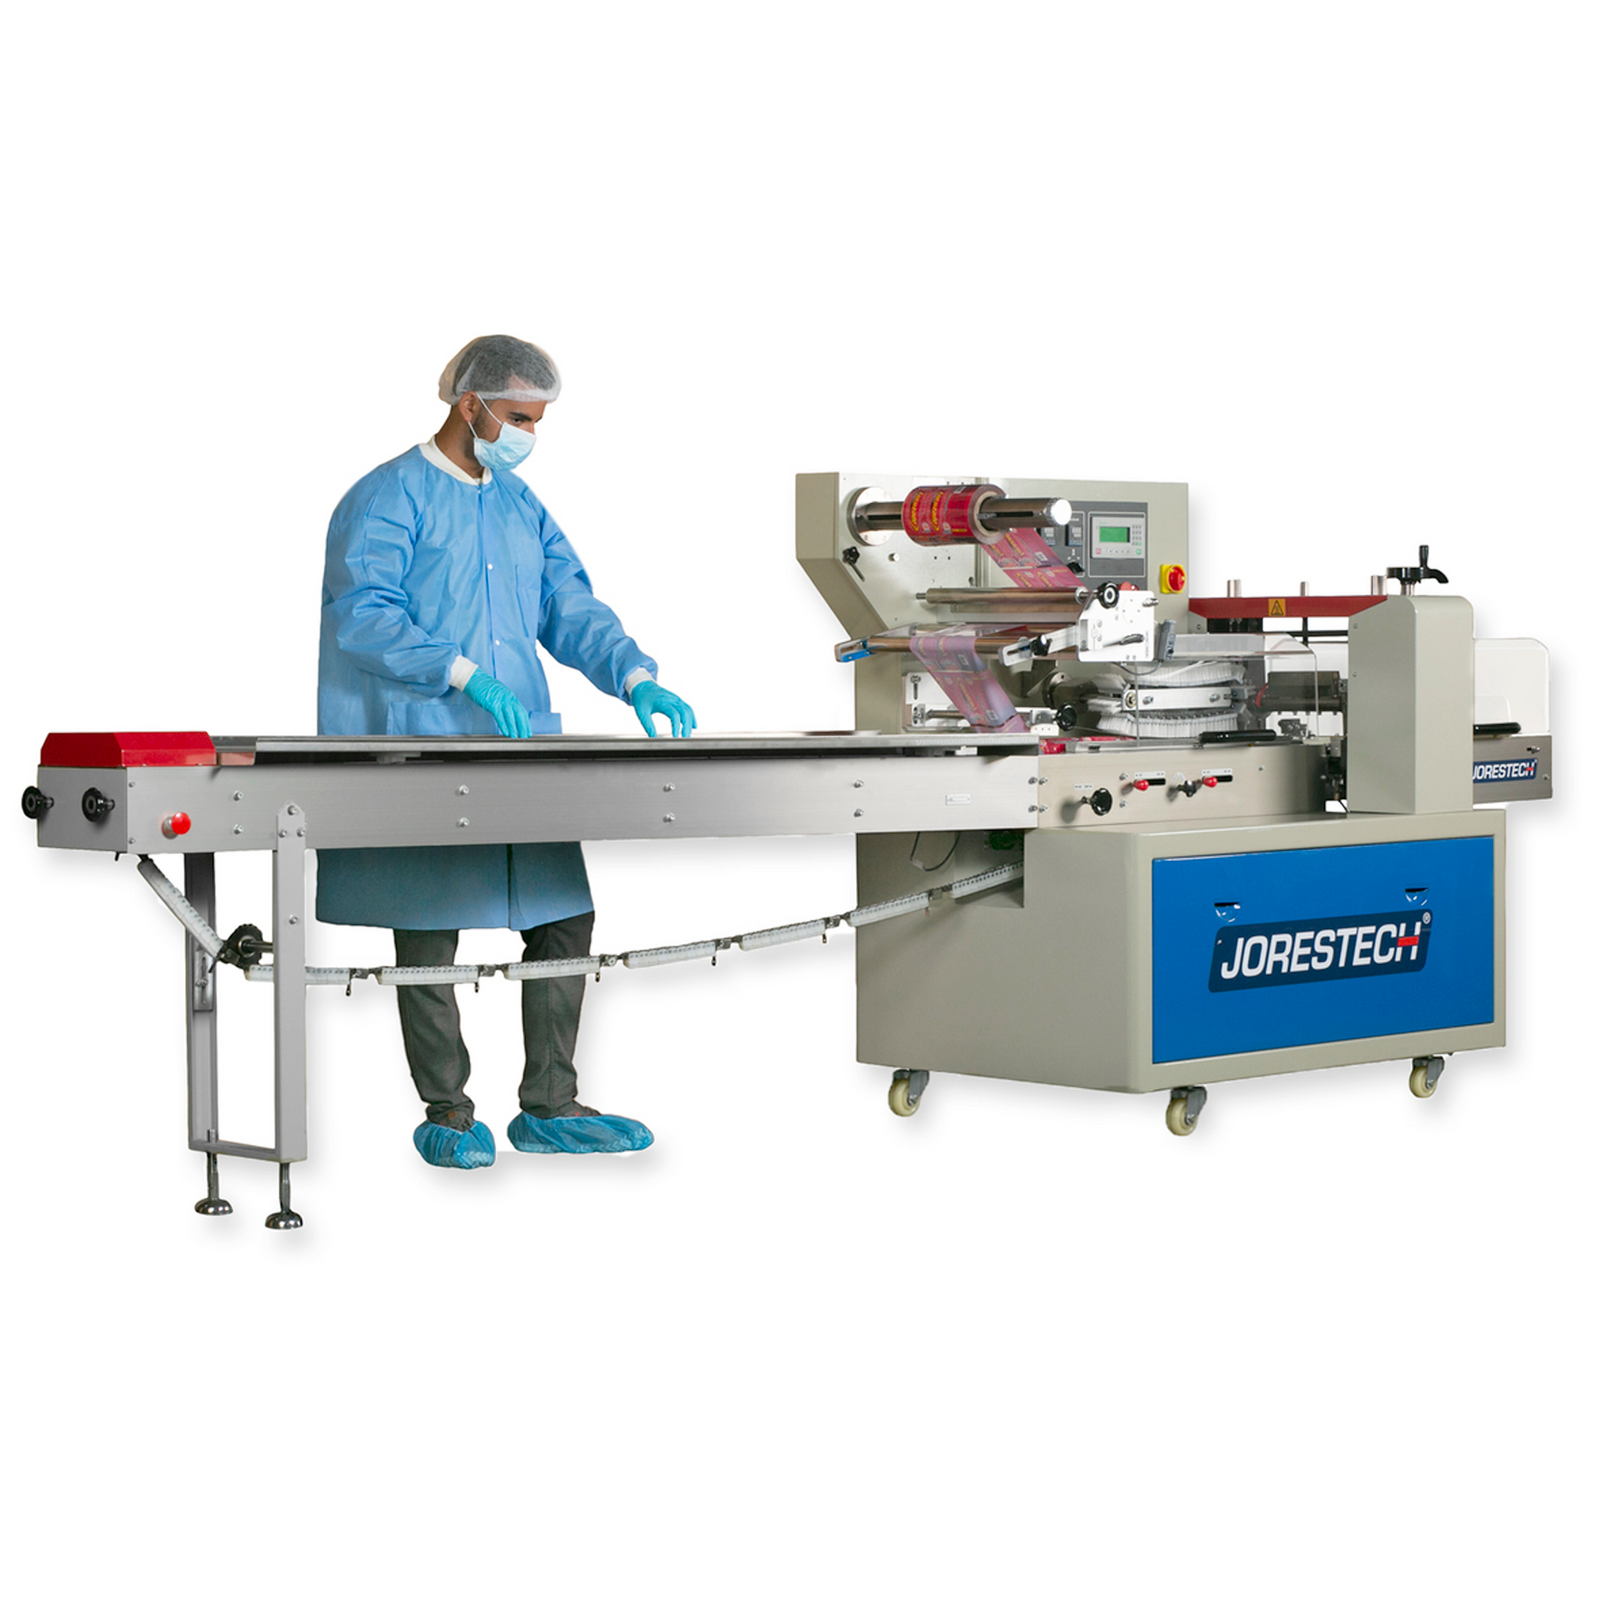 Operator dressed in a blue full PPE suit is seen placing products on the chain conveyor of a horizontal flow wrapping machine